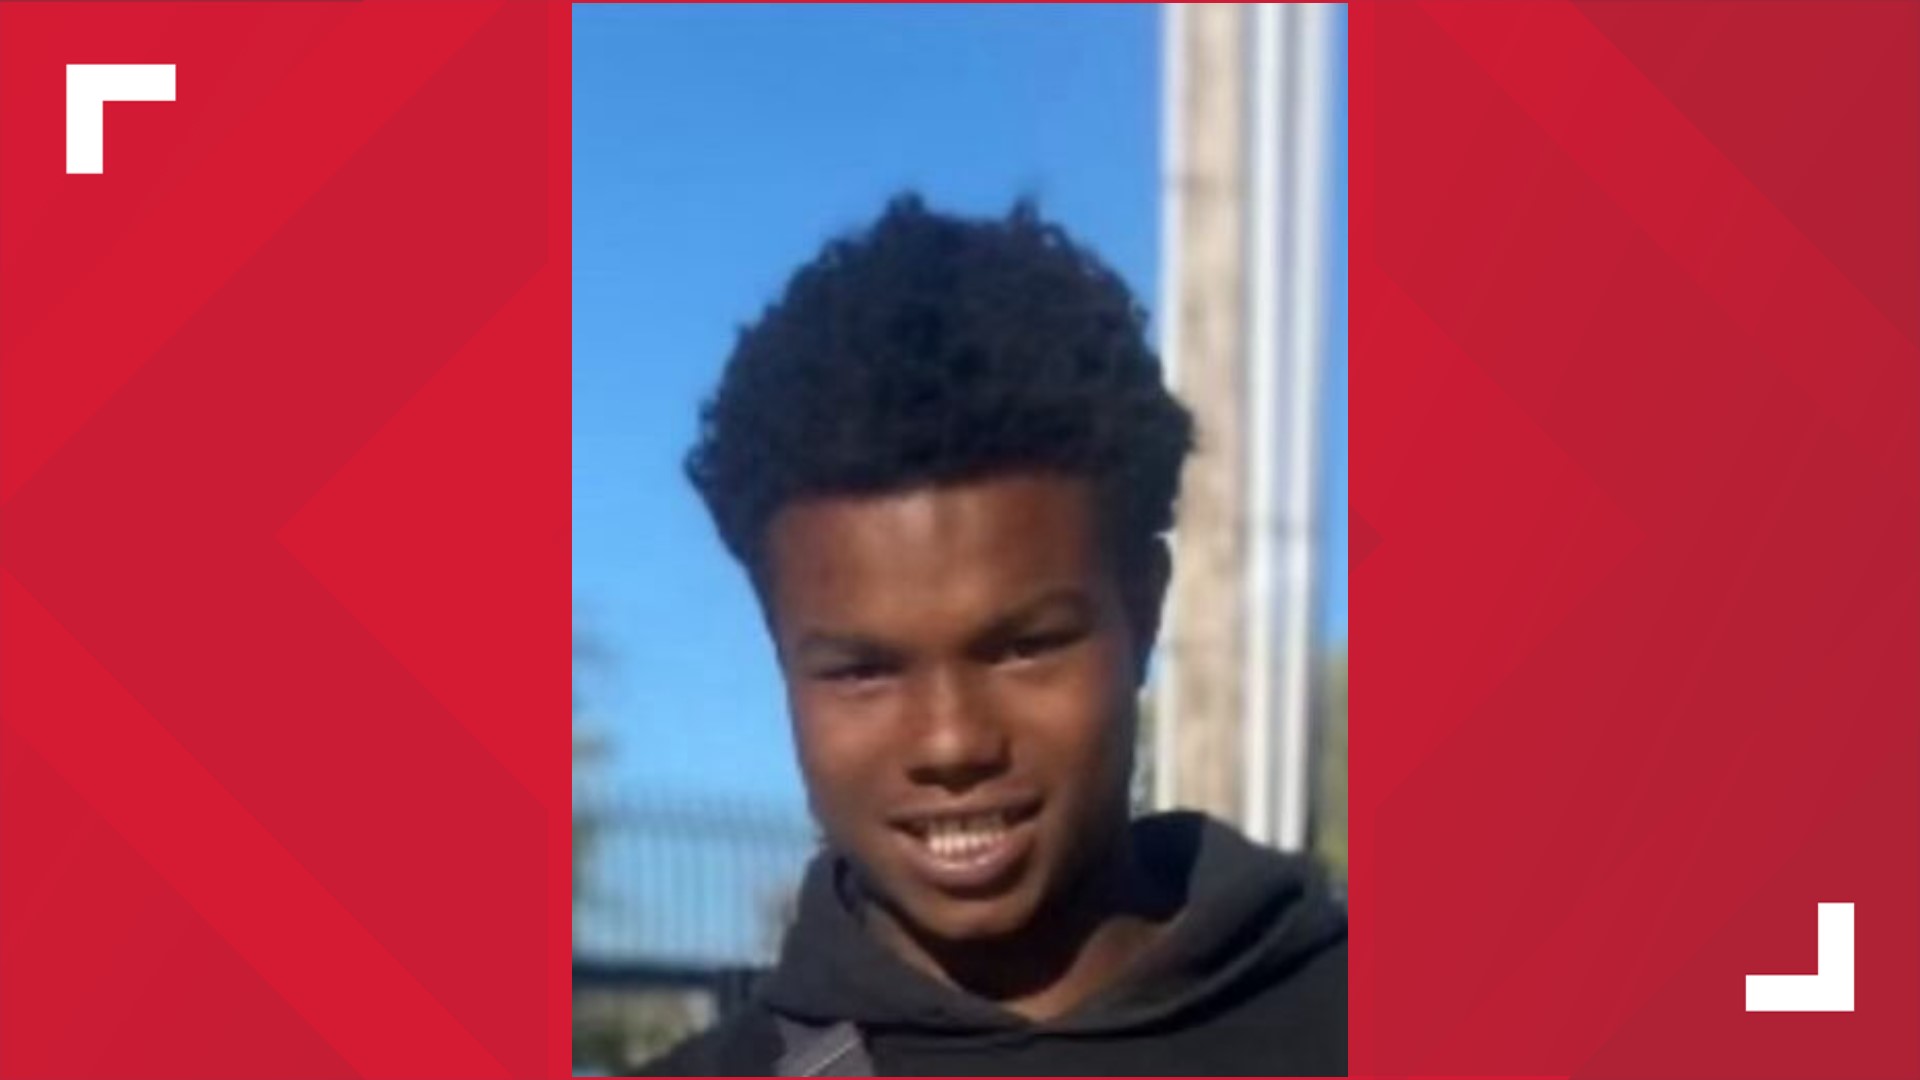 At-large warrant issued for 18-year-old suspect in connection to fatal Maplewood shooting. An at-large warrant was issued Monday afternoon for the suspect.